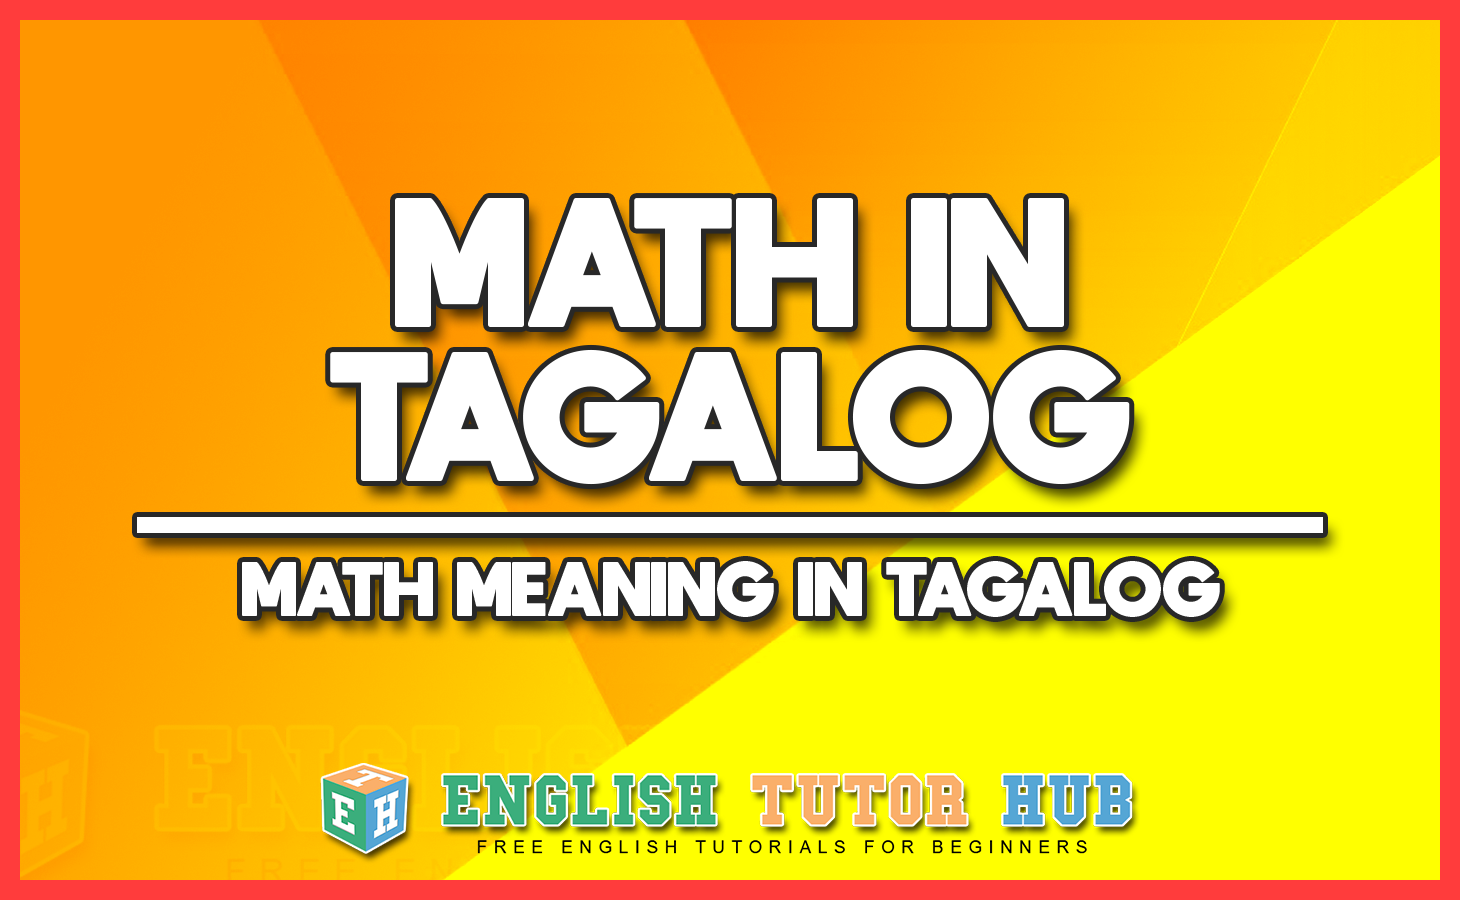 MATH IN TAGALOG - MATH MEANING IN TAGALOG